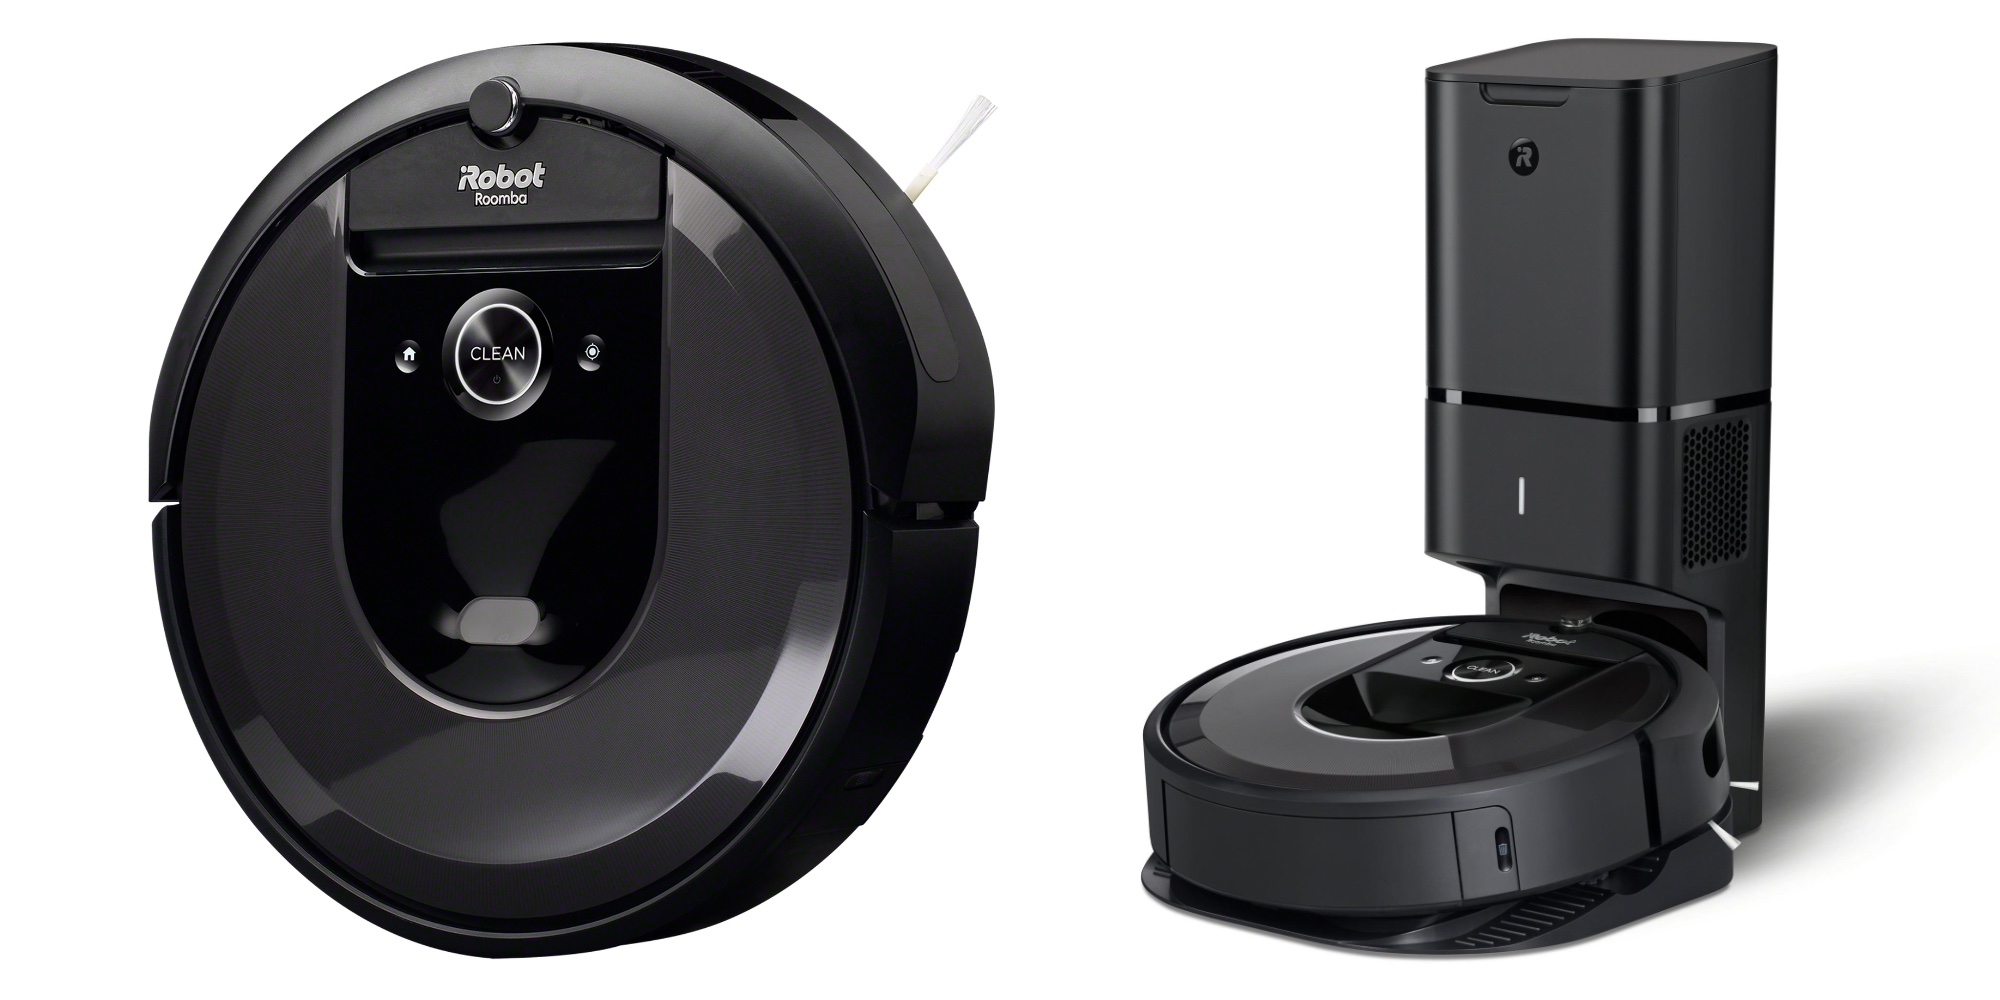 iRobot's Roomba i7+ Smart Robo Vacuum drops to new all-time low at $329